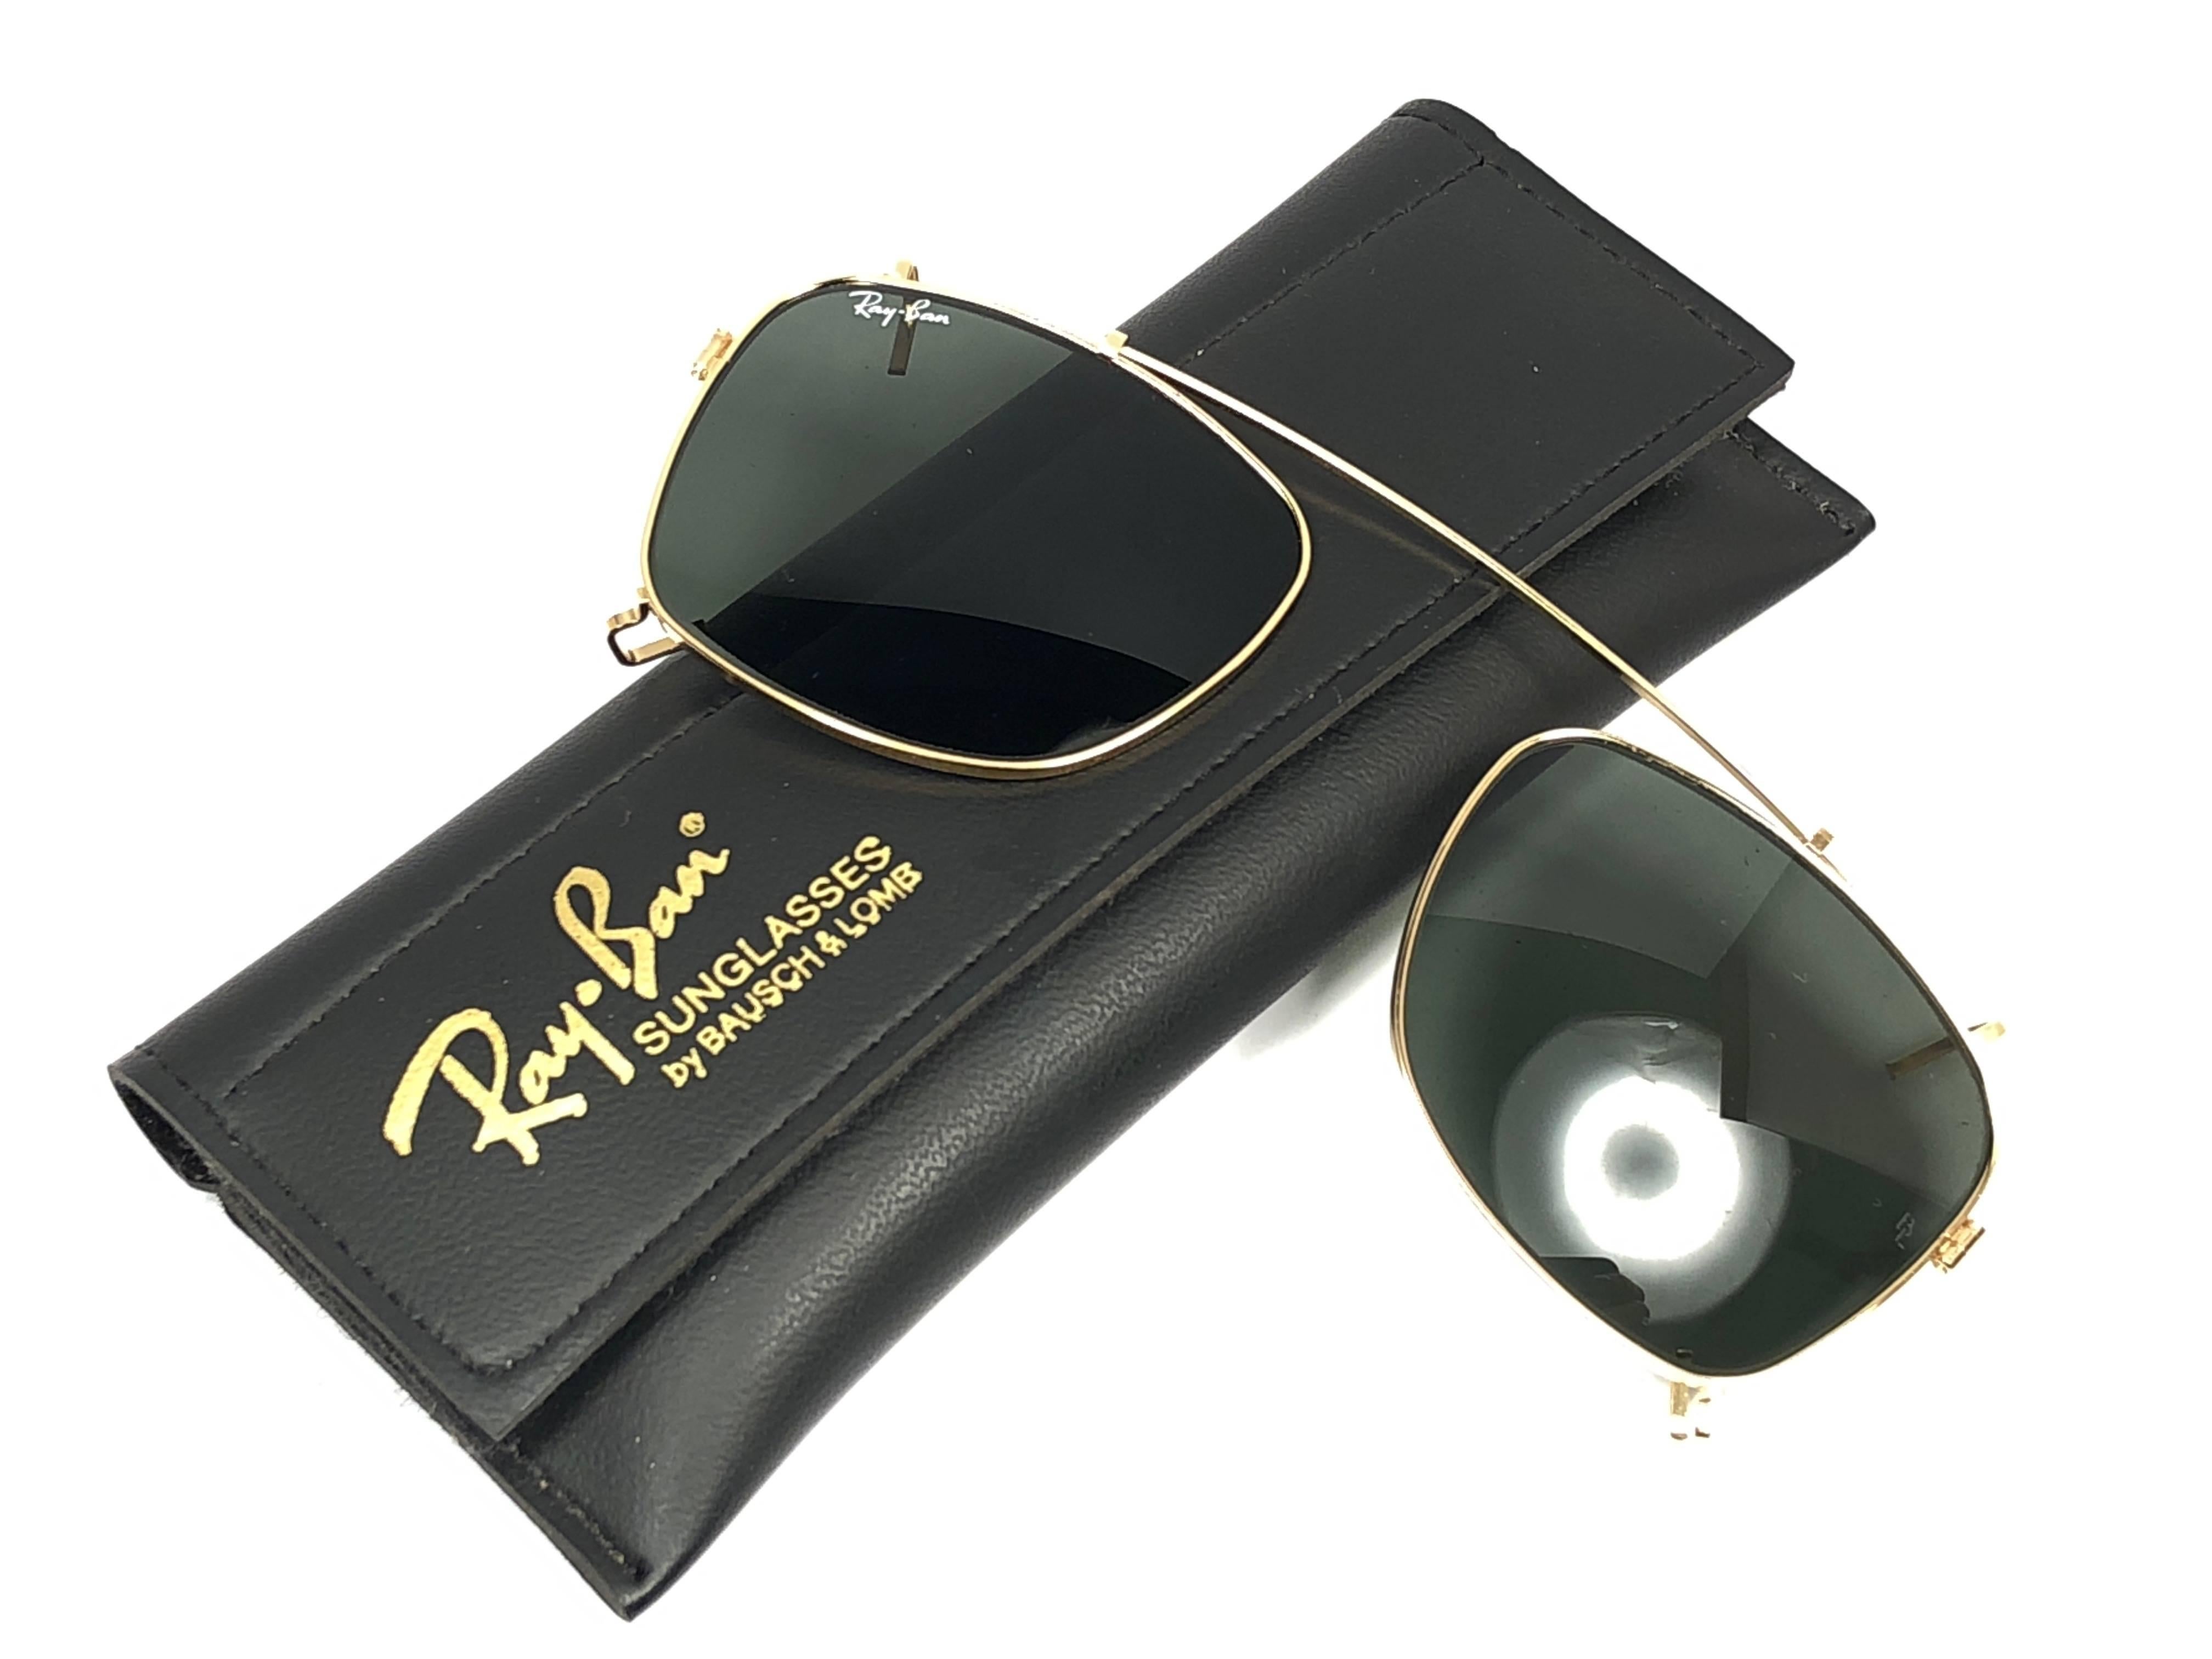 New Vintage Ray Ban B&L Clip On For Wayfarer Sunglasses Collectors Item USA In New Condition For Sale In Baleares, Baleares